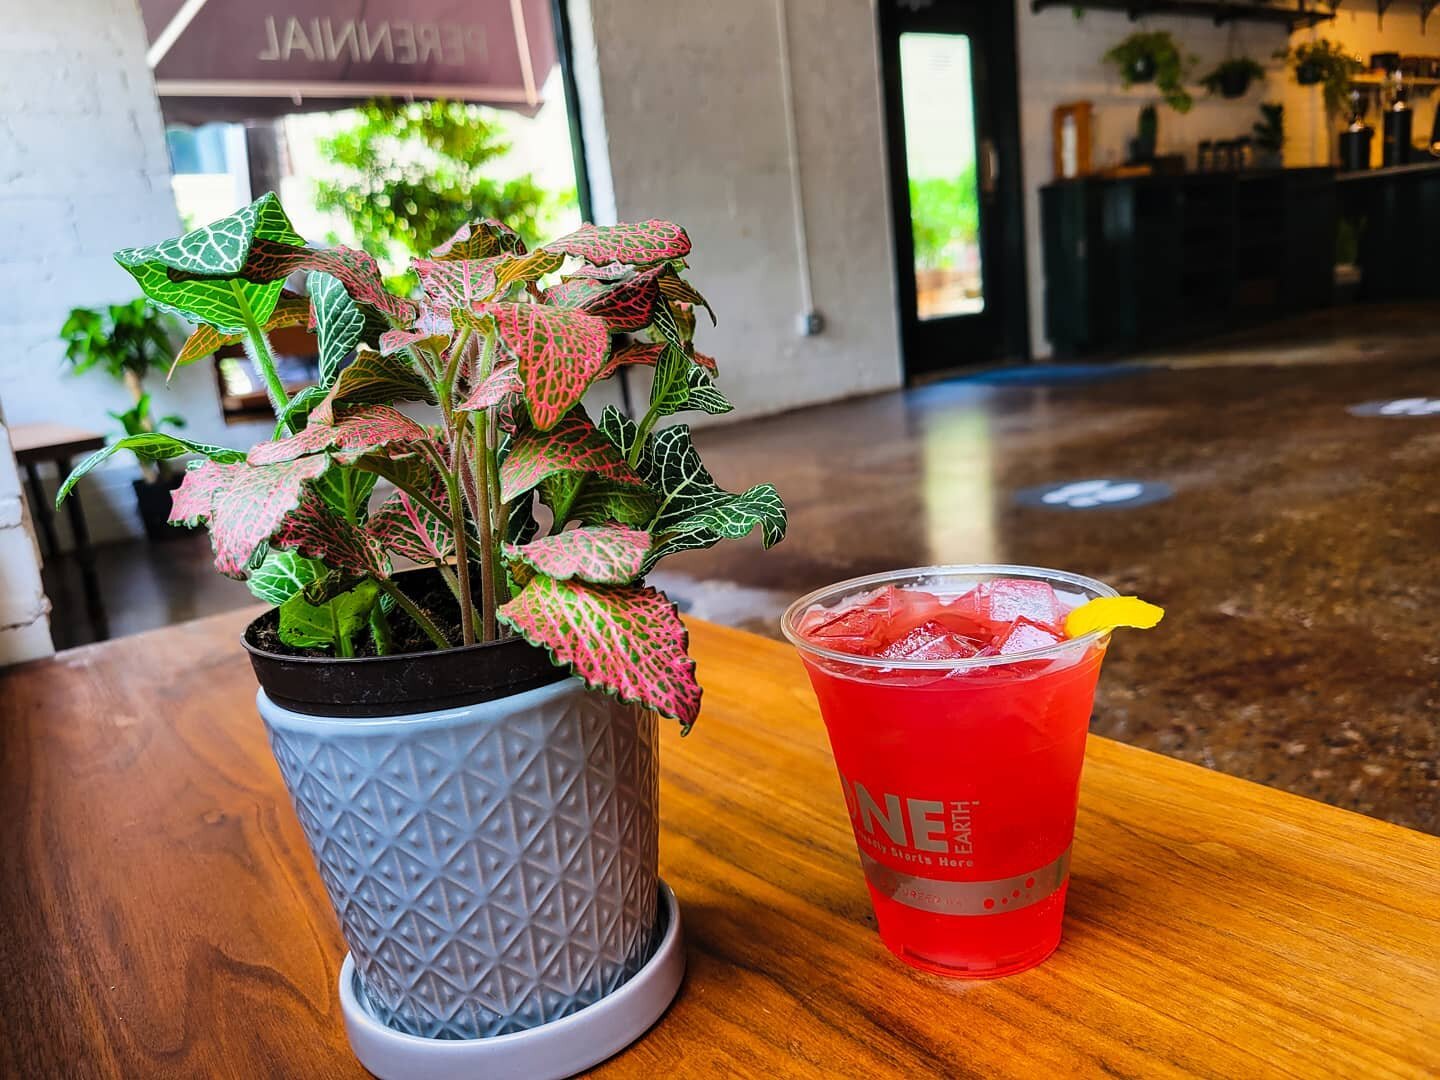 Let's cheers to the weekend with a hibiscus fizz! Made with lemonade, hibiscus zest tea and topped with soda 🍋🌸

We're here until 3pm today!